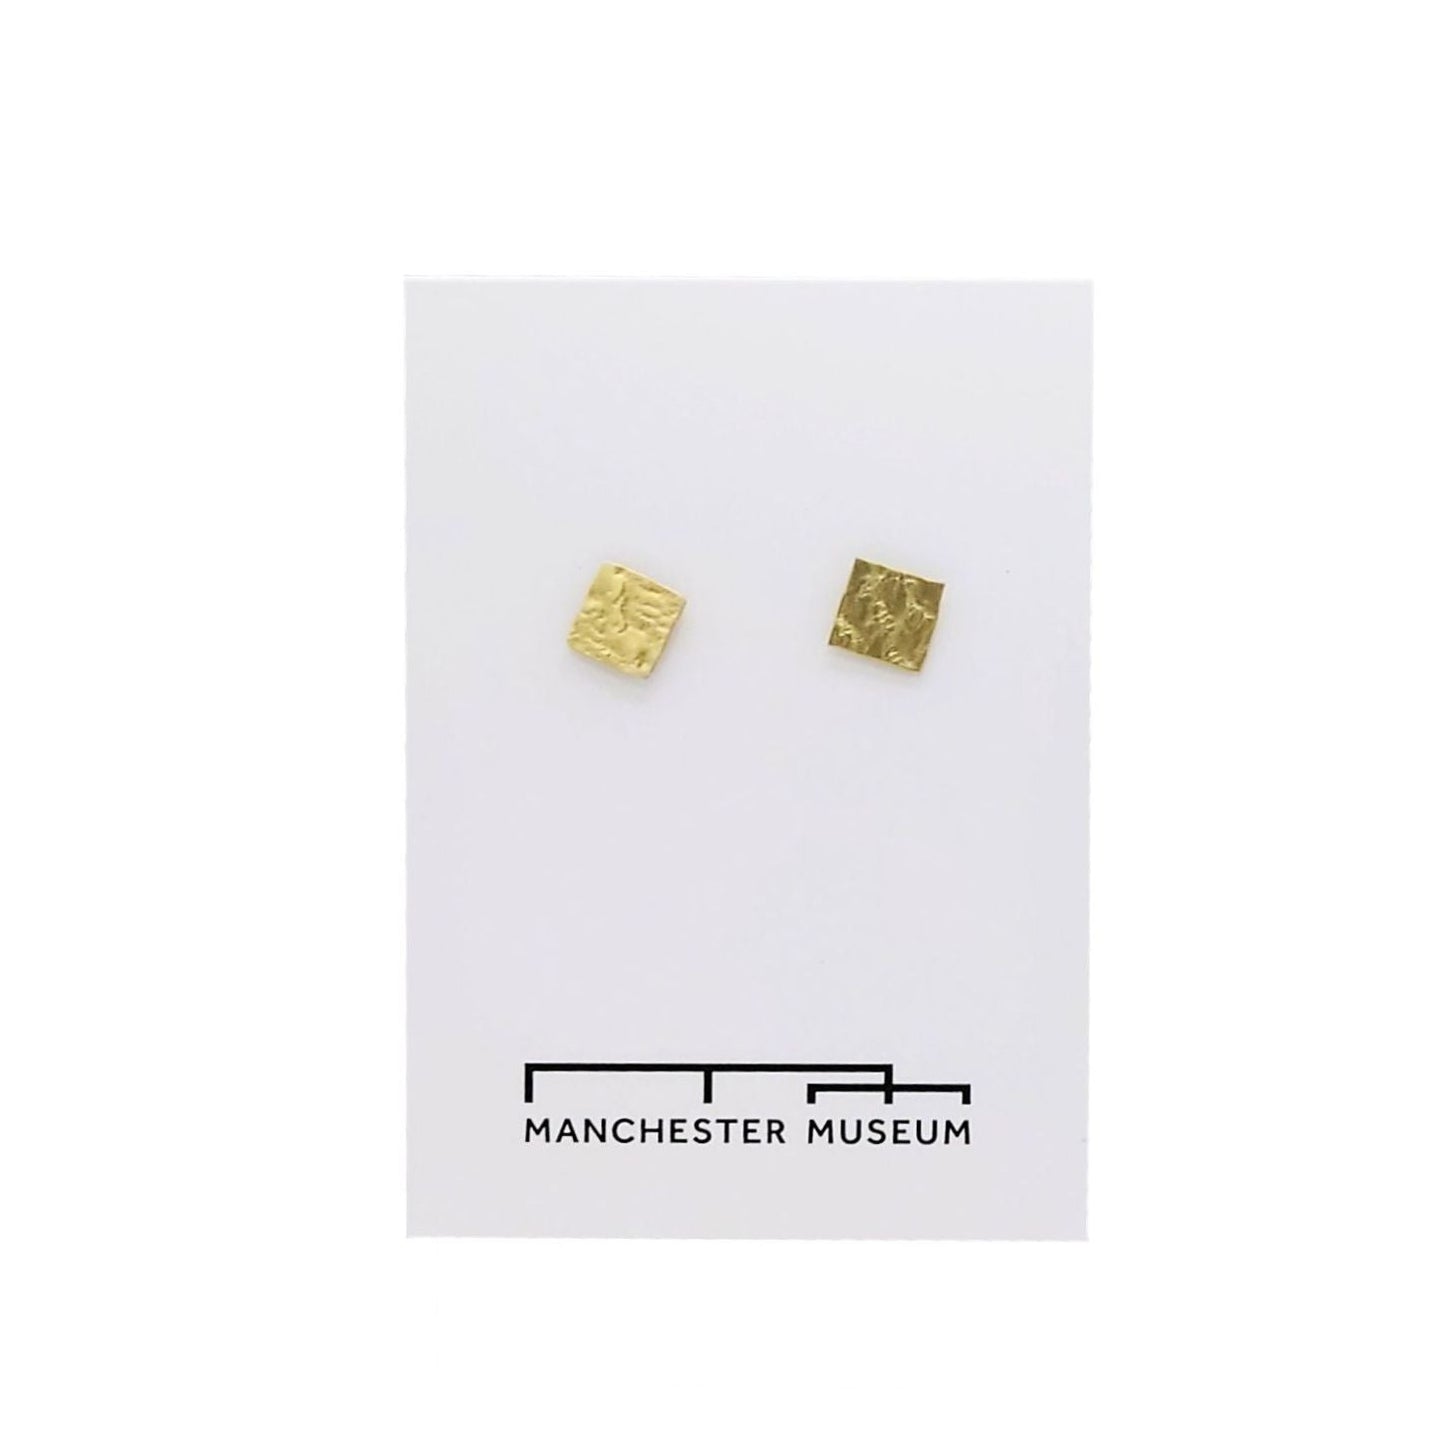 Square hammered brass stud earrings on white, museum branded backing card.